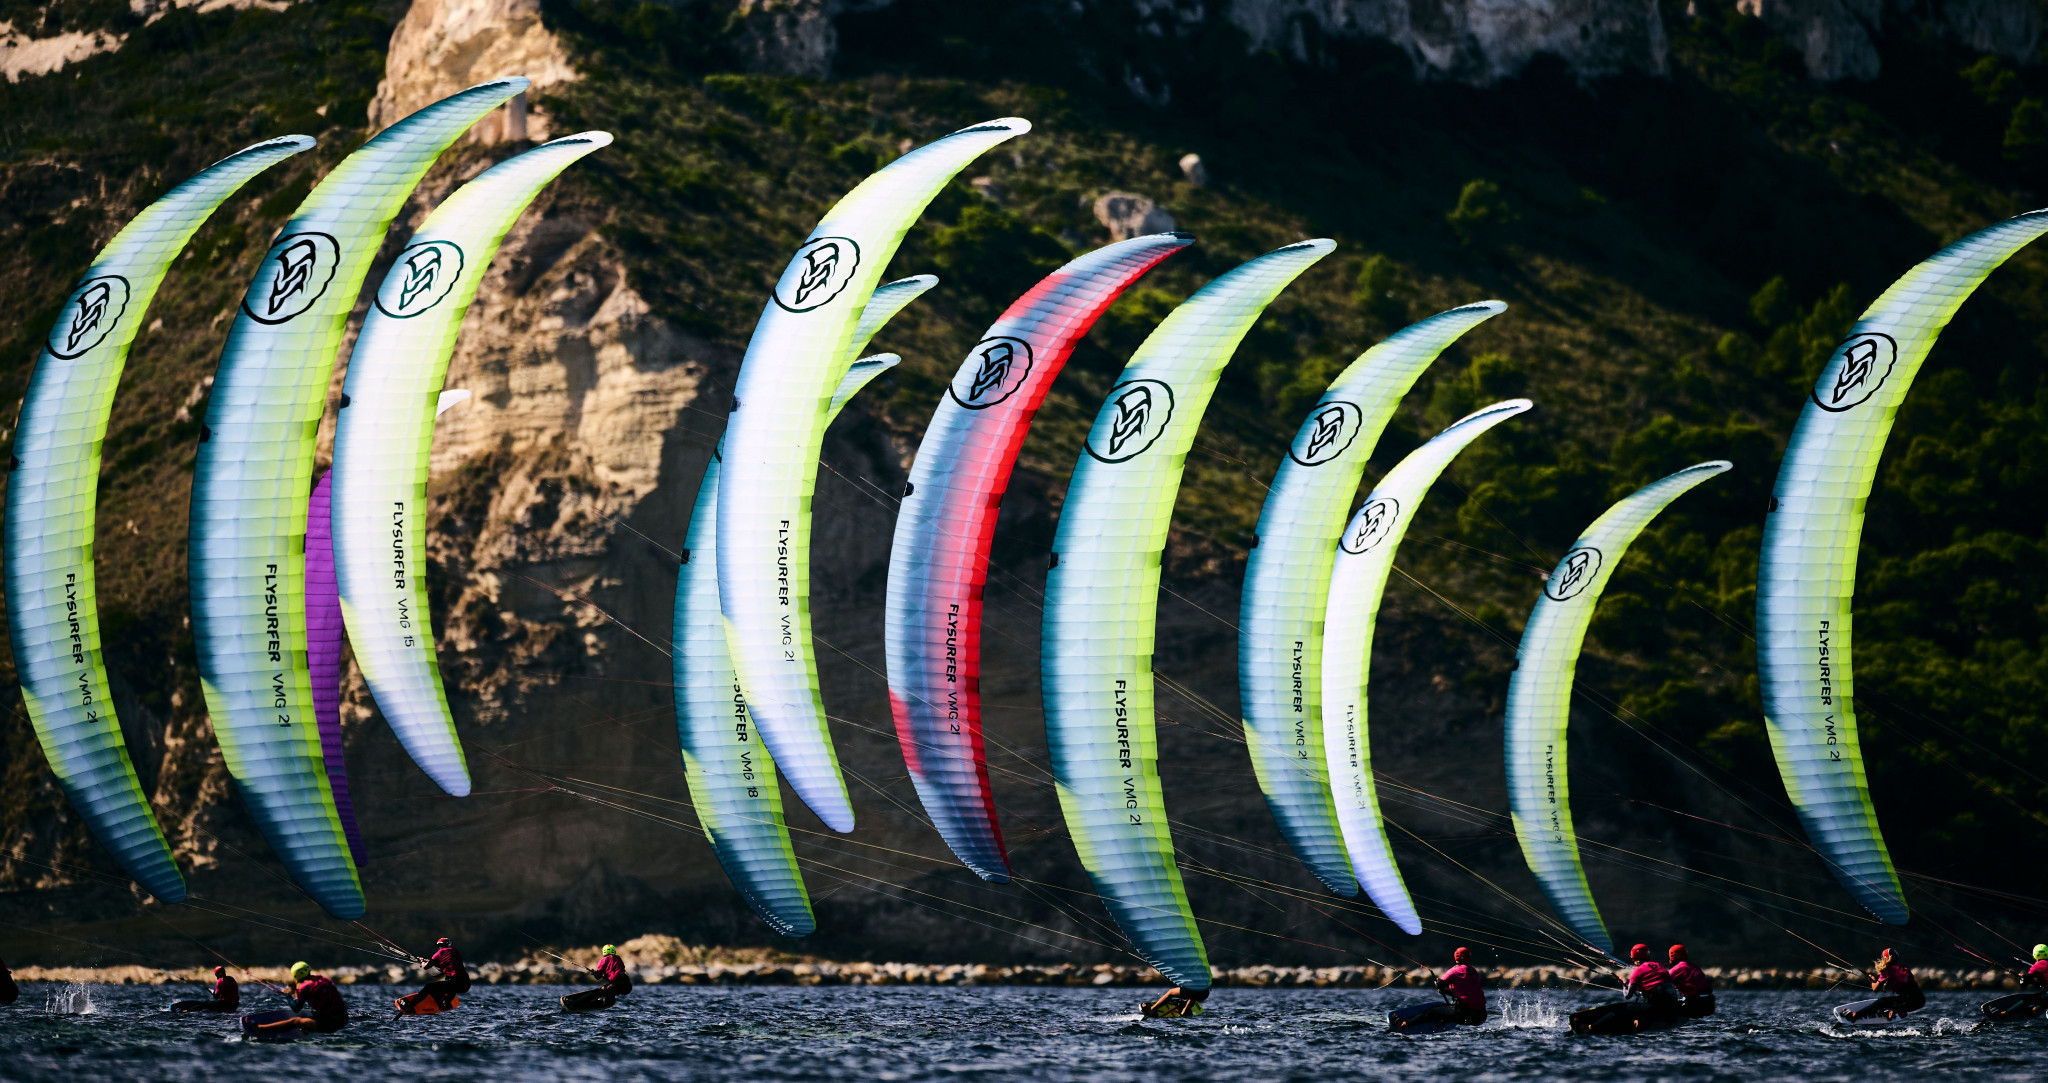 Toni Vodisek of Slovenia managed two first place finishes and one second place finish to total 38 points and maintain the advantage at the top ©Formula Kite